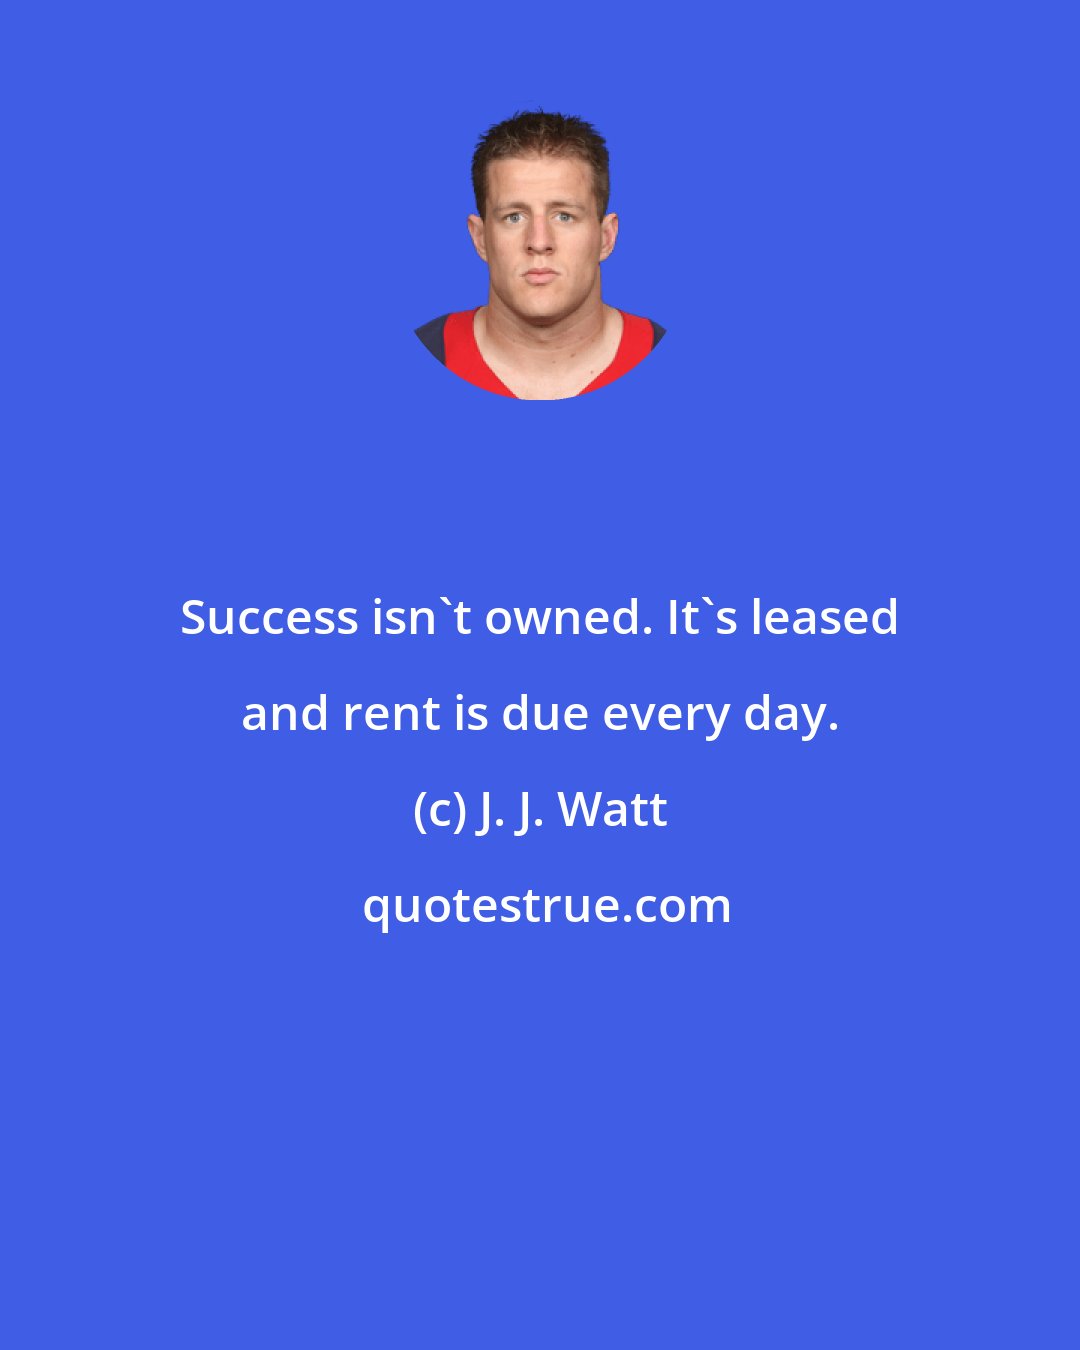 J. J. Watt: Success isn't owned. It's leased and rent is due every day.